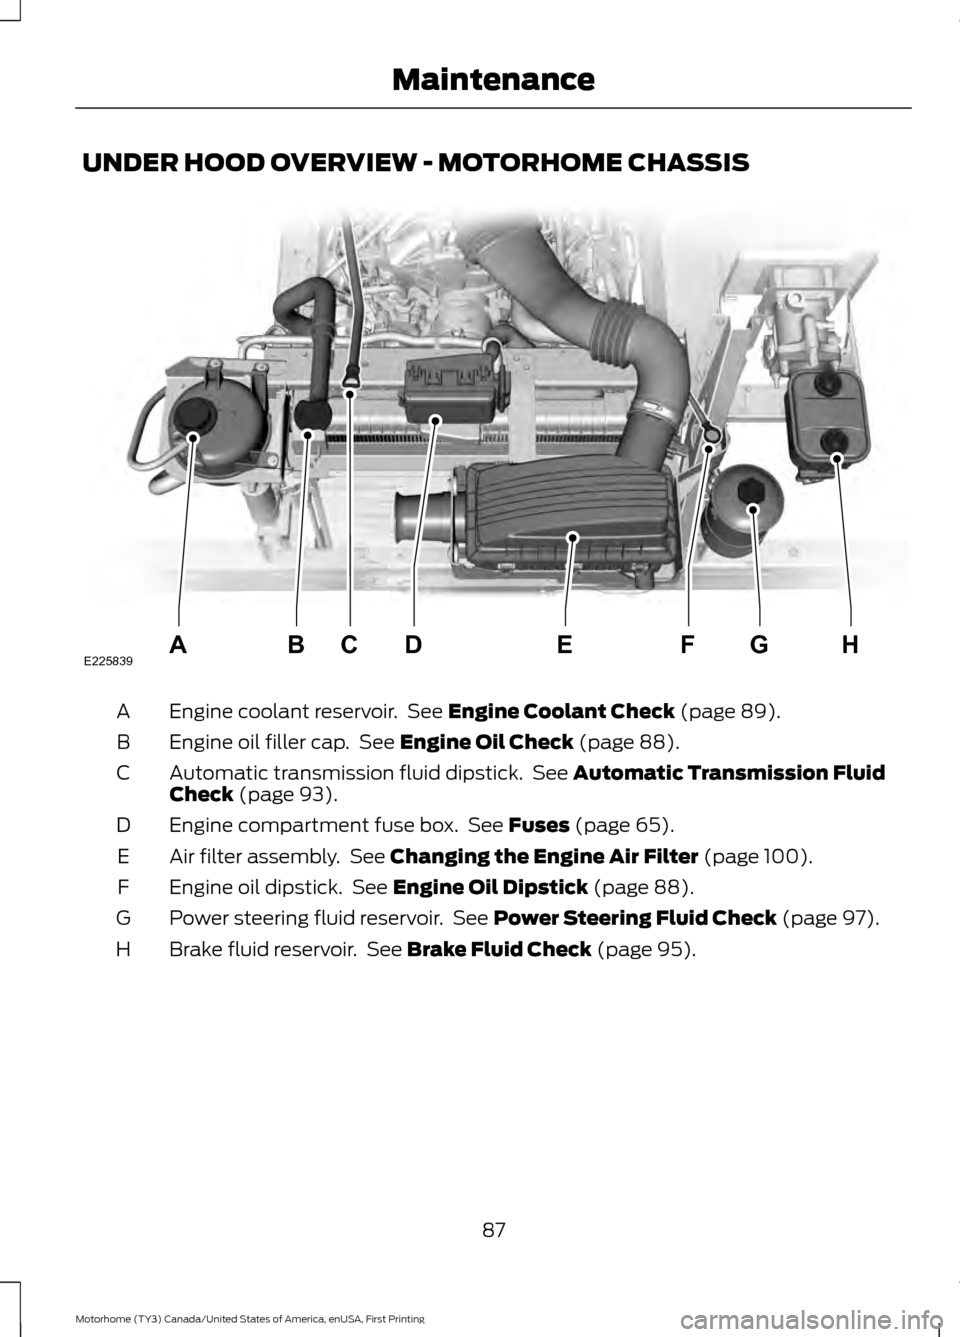 FORD F SERIES MOTORHOME AND COMMERCIAL CHASSIS 2017 13.G User Guide UNDER HOOD OVERVIEW - MOTORHOME CHASSIS
Engine coolant reservoir.  See Engine Coolant Check (page 89).
A
Engine oil filler cap.  See 
Engine Oil Check (page 88).
B
Automatic transmission fluid dipstic